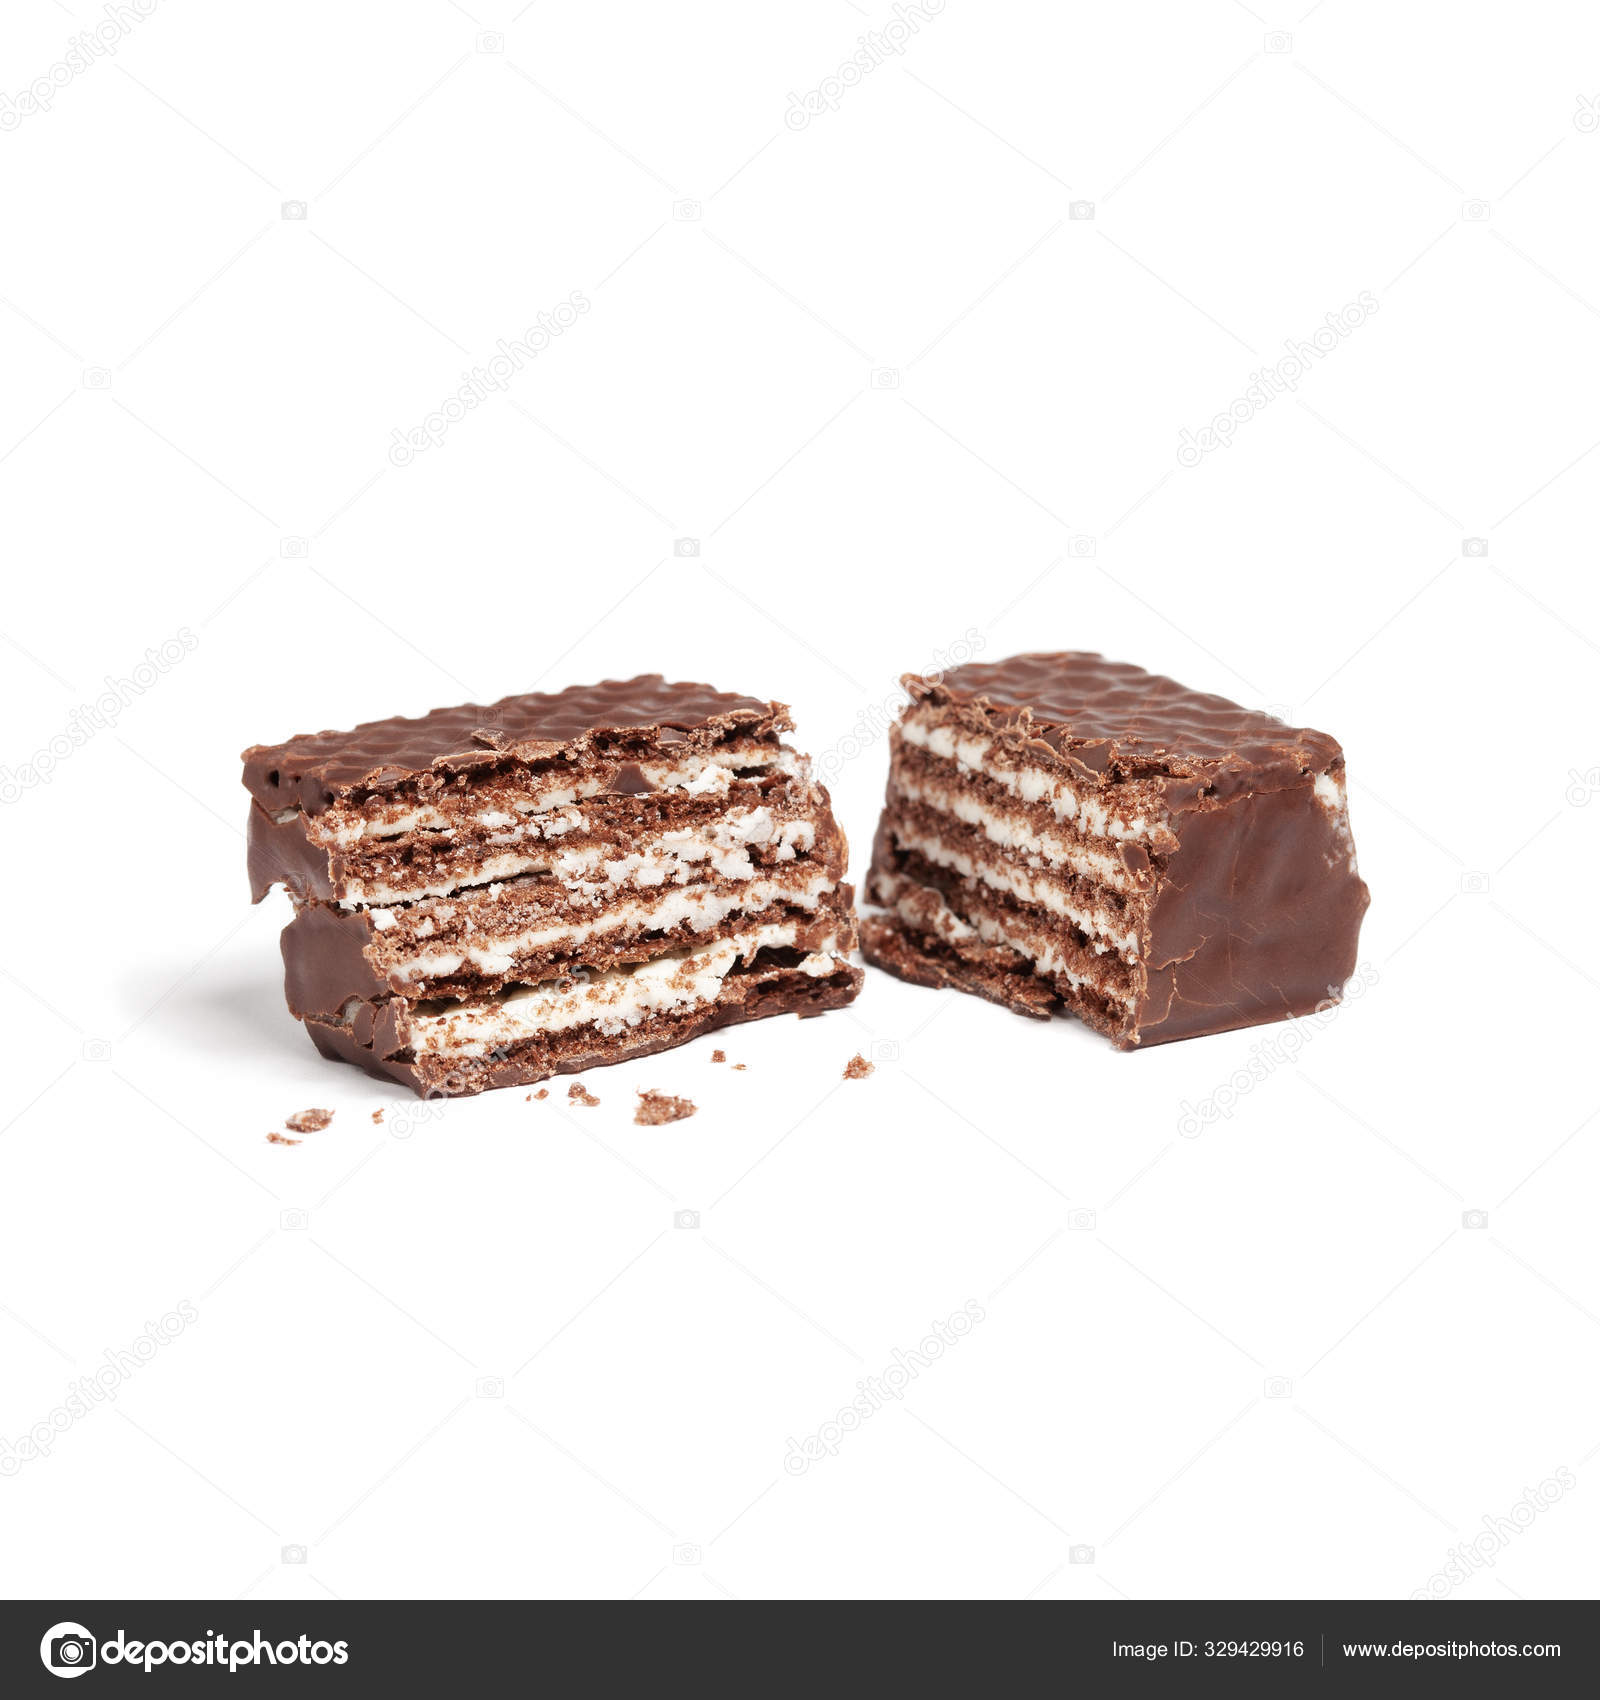 Wafer Cube With Chocolate And Milk Broken Into Two Halves On Whi Stock Photo C Photoslash 329429916